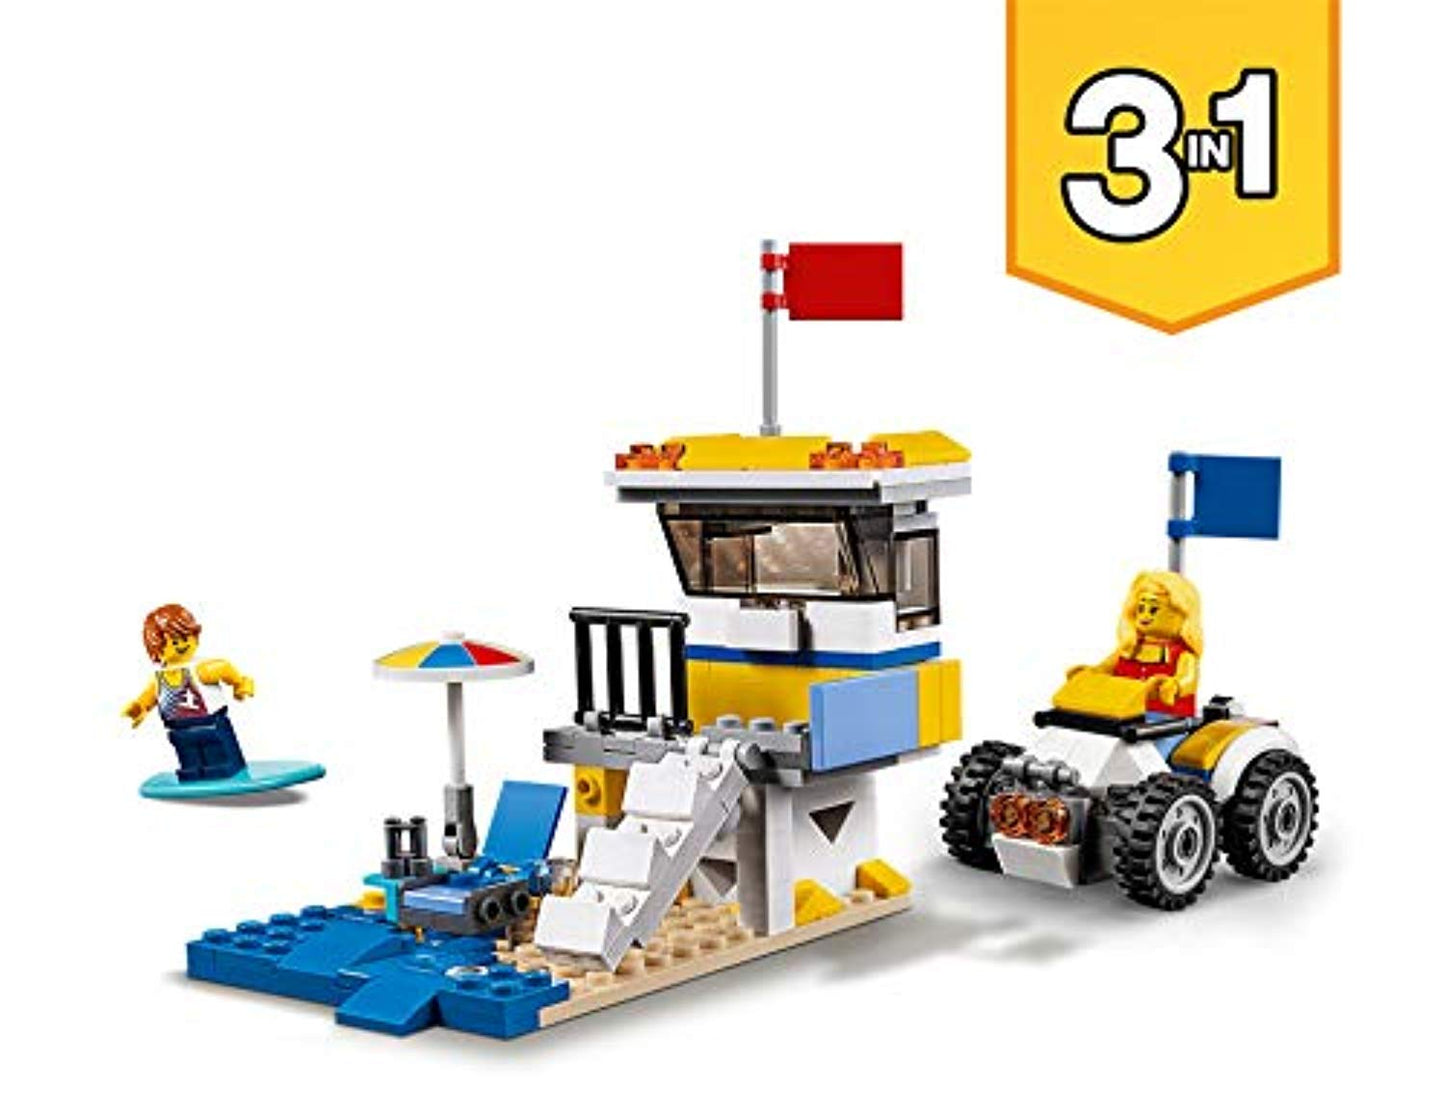 LEGO 31079 Creator 3in1 Sunshine Surfer Van Lifeguard Tower and Beach Buggy Model Building Set with Quad Bike, Toys for Kids 8 - 12 Years Old - Offer Games